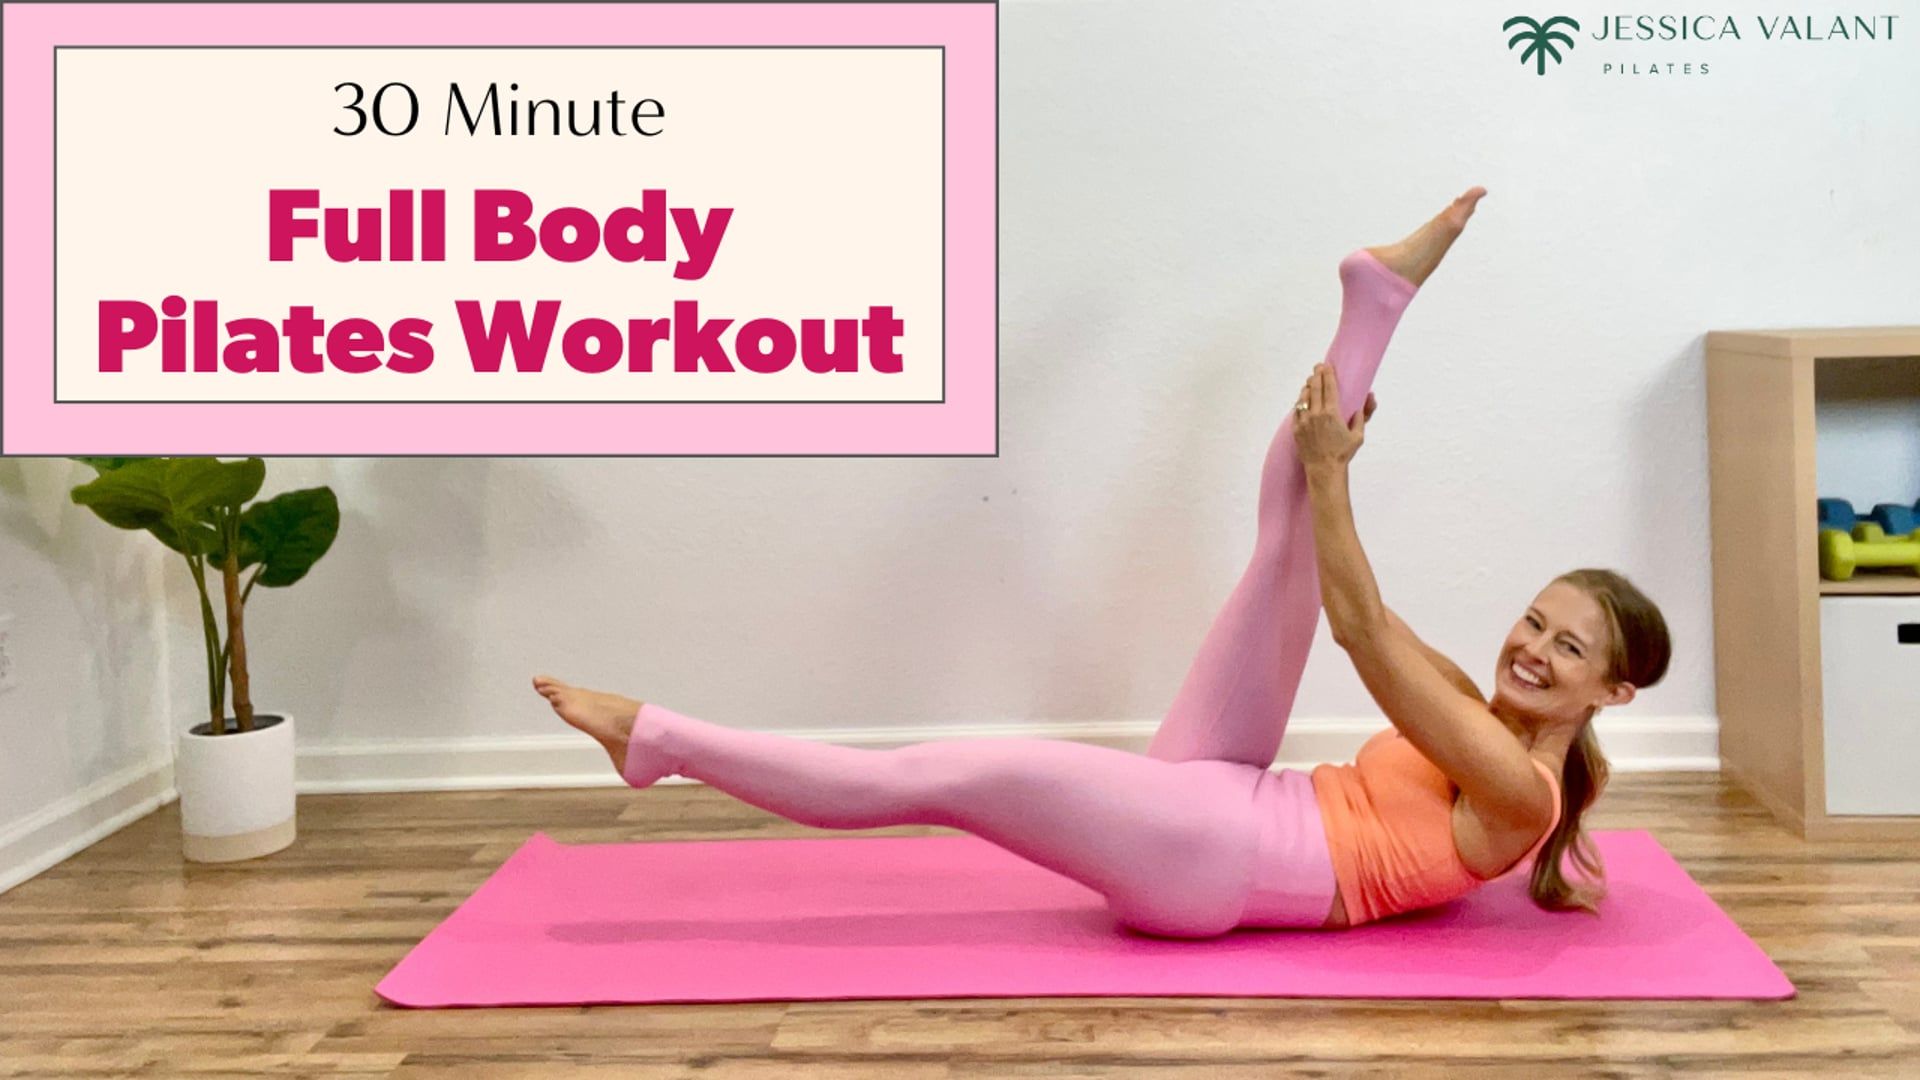 30 MIN FULL BODY PILATES WORKOUT FOR BEGINNERS - AT HOME PILATES